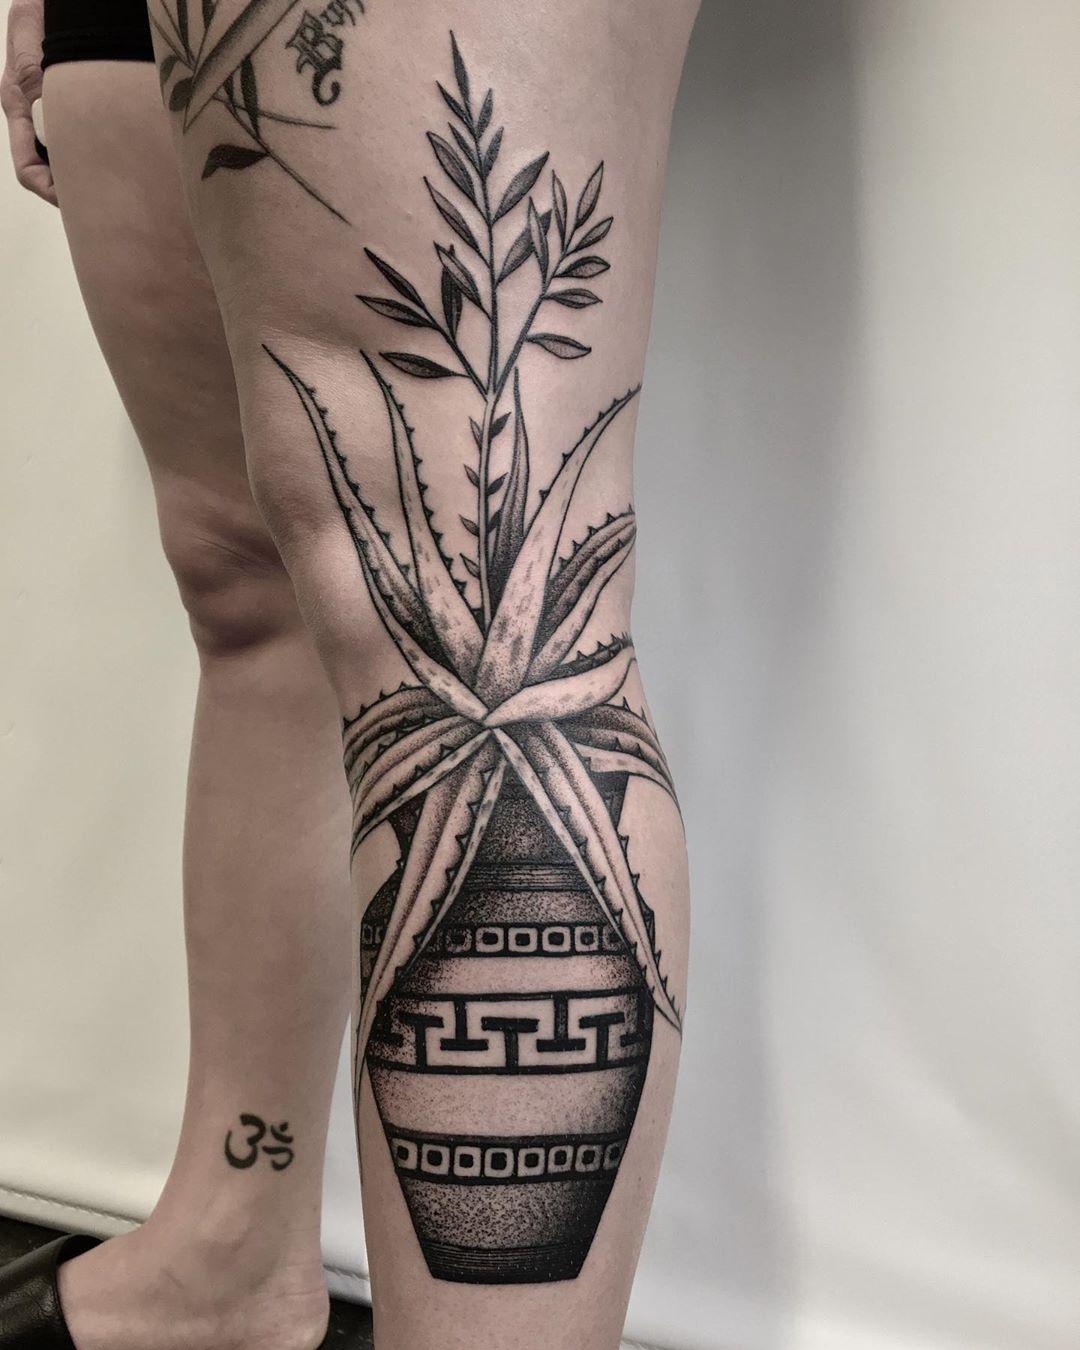 Aloe and pottery by @justinoliviertattoo